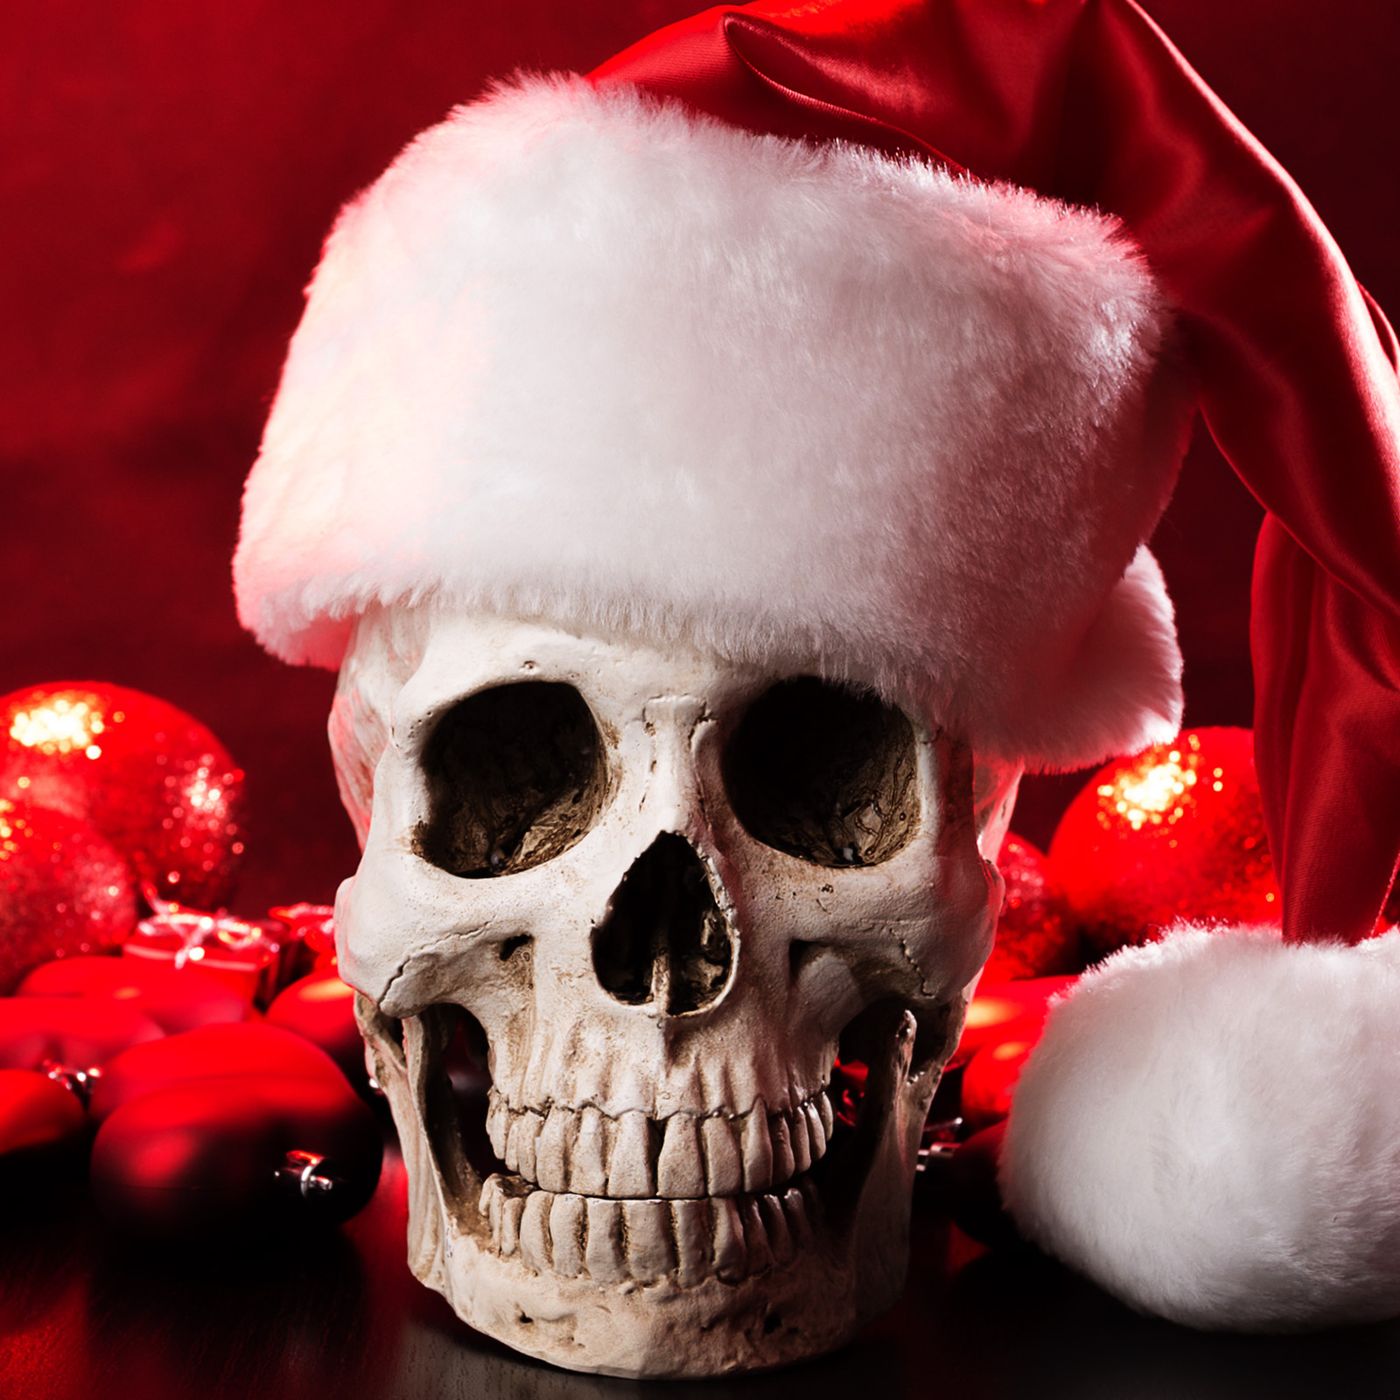 Christmas Scary Stories Vol. 1 - Five Ghoul-Tide Horrors To Chill You! Image